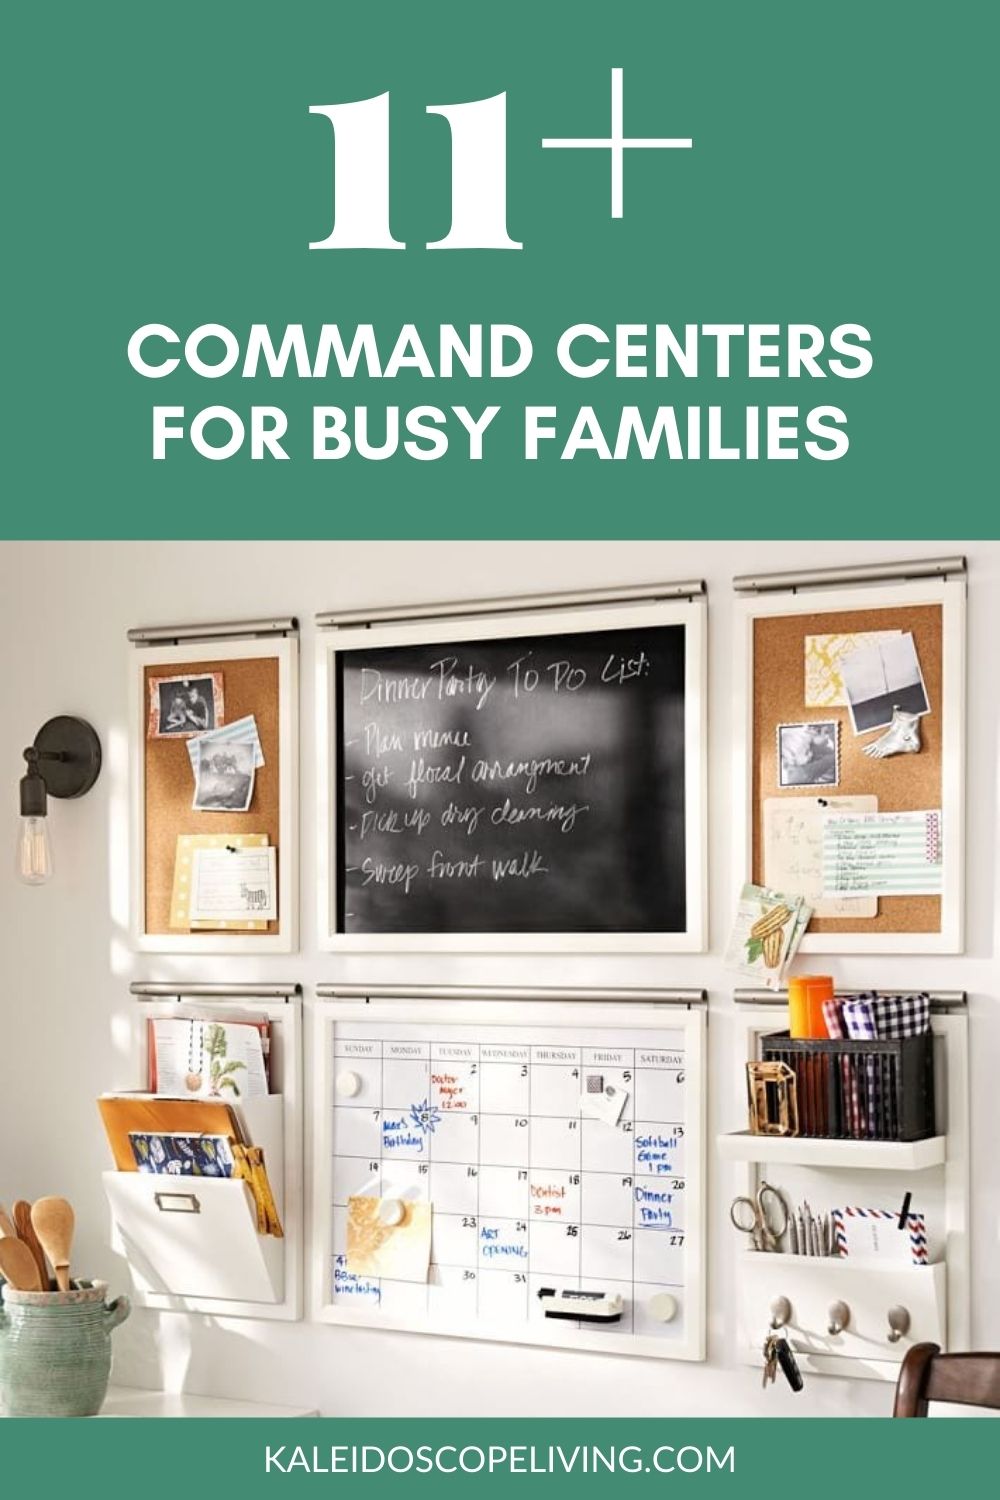 The BEST Family Command Center Options To Get and Stay Organized